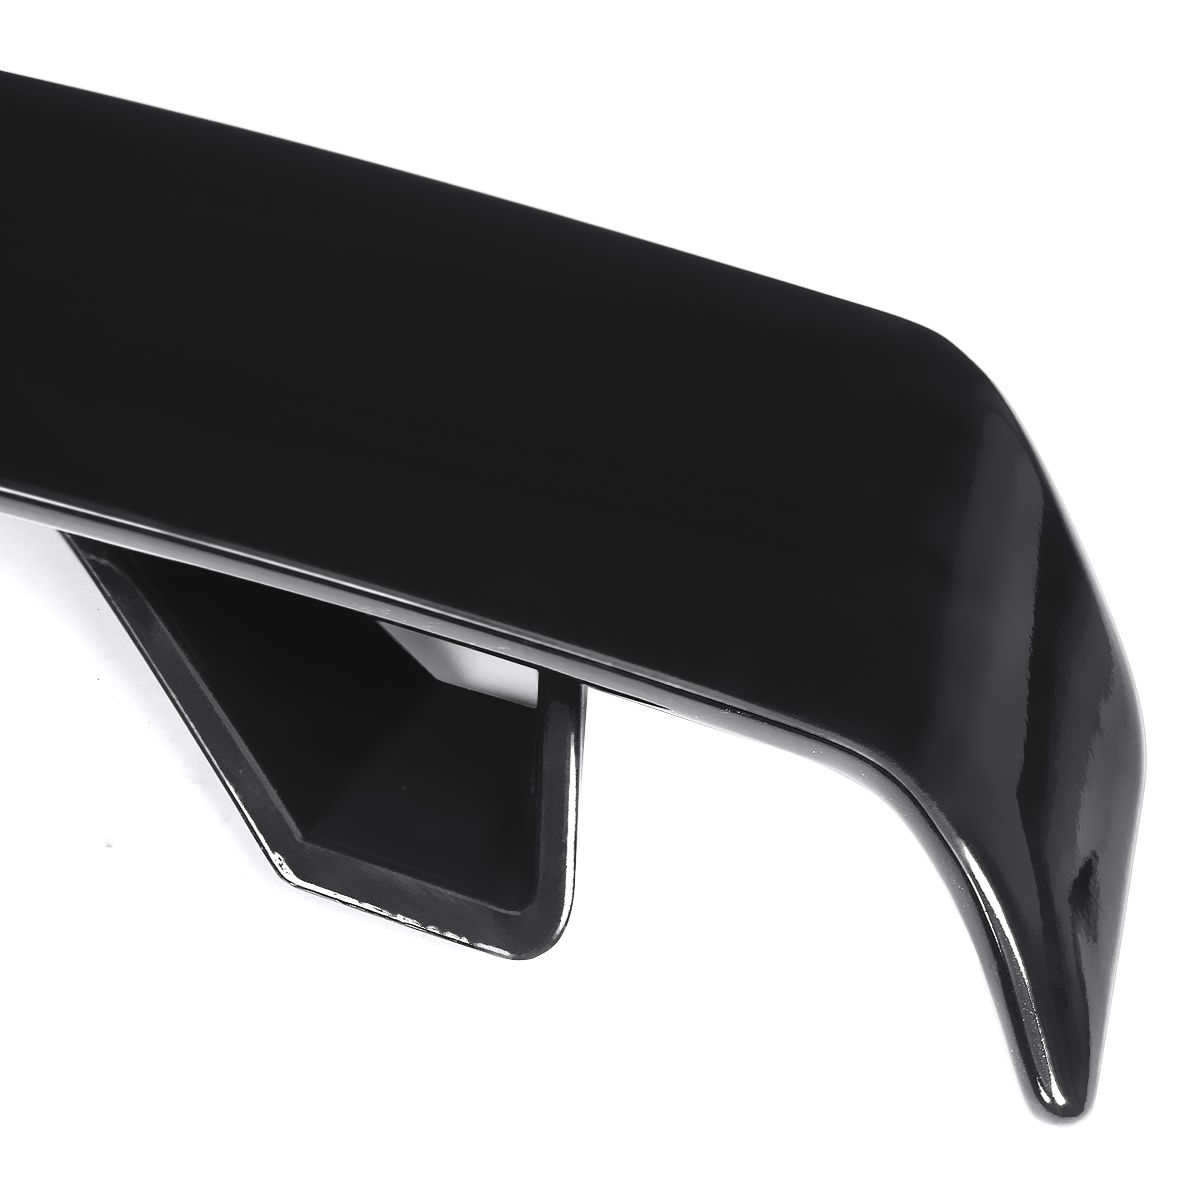 Type-R-Style-Car-Rear-Trunk-Spoiler-Wing-Gloss-Black-For-AUDI-A3-S3-A4-S4-A5-S5-RS5-TTS-1603583